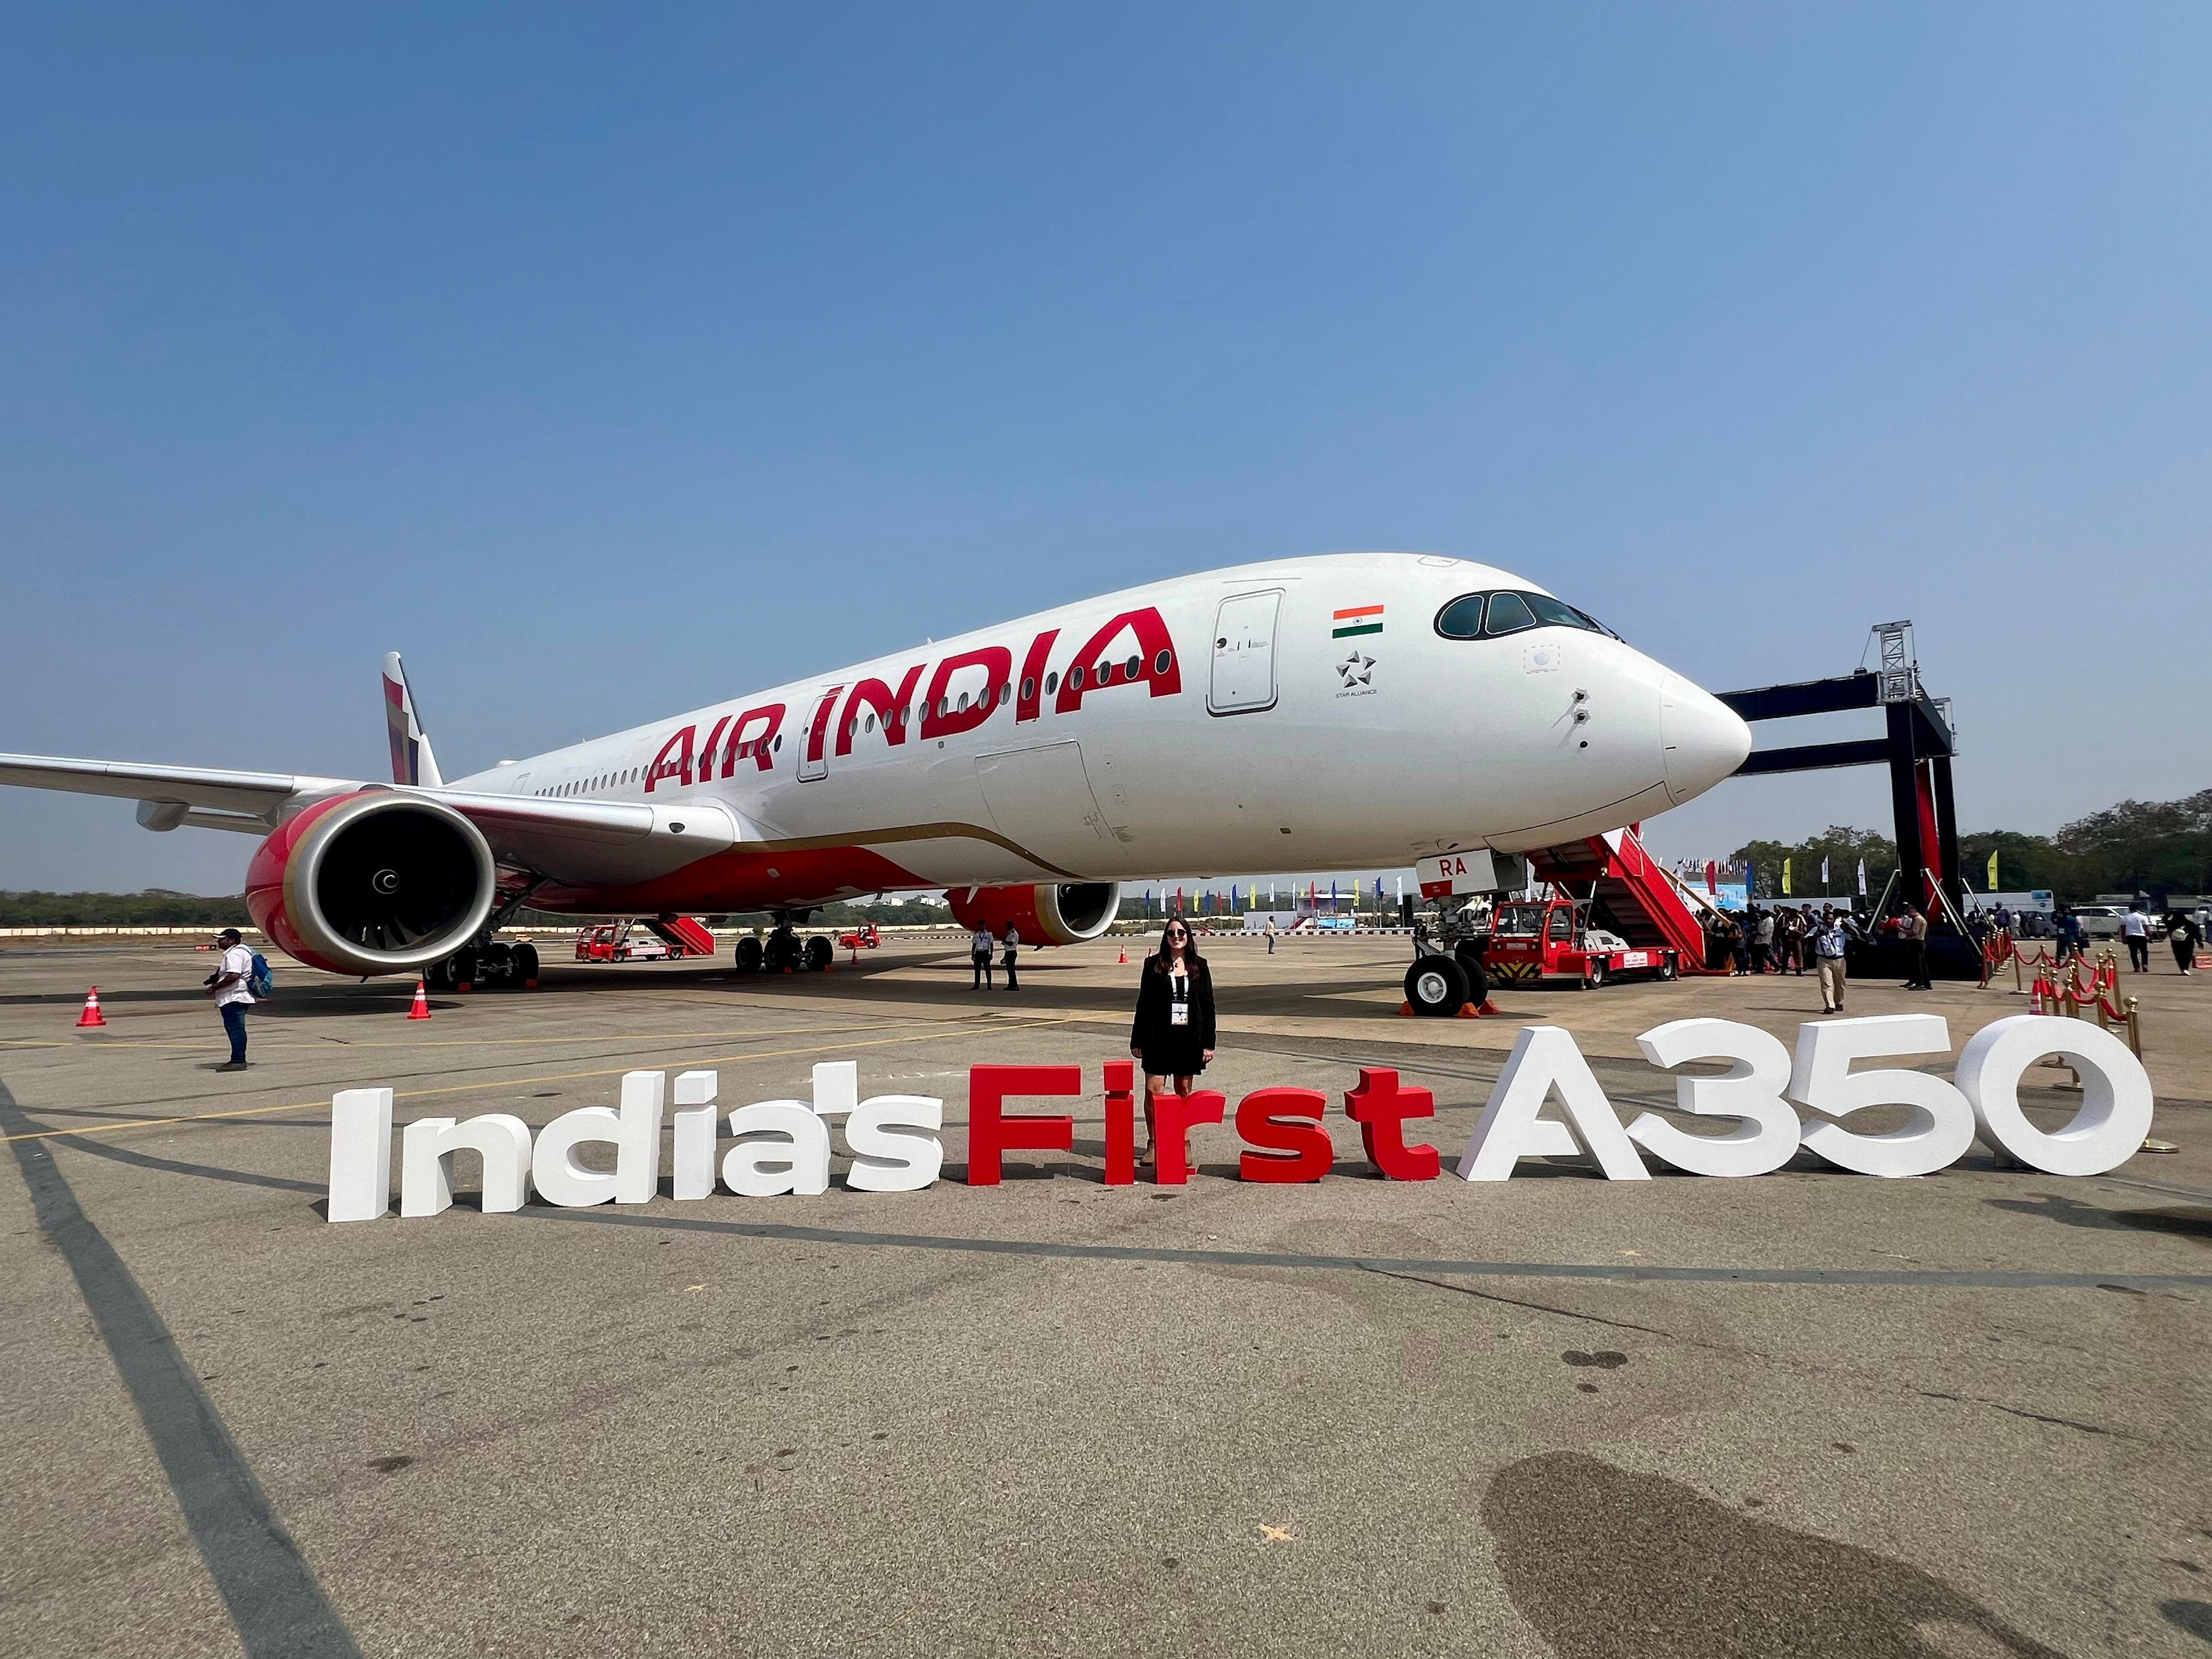 <ul class="summary-list"><li>Air India unveiled its first-ever Airbus A350 at the Wings Airshow in Hyderabad this month.</li><li>The aircraft features a <a href="https://www.businessinsider.com/see-new-luxury-cabins-air-india-retrofit-onto-boeing-777-2023-8">new-and-improved cabin</a> complete with privacy doors in business class.</li><li>After touring the A350, I think customers will be pleased with the upgrades.</li></ul><p>Air India welcomed its new Airbus A350 in December — a first for the nation's flag carrier — and it's an incredible improvement from the <a href="https://www.businessinsider.com/what-its-like-to-fly-business-class-on-the-air-india-787-dreamliner-2018-2#unfortunately-honig-had-to-use-the-hot-towel-to-wipe-down-his-seat-and-still-ended-up-picking-up-quite-a-bit-of-dirt-7">airline's notoriously mediocre product.</a></p><p>The next-generation aircraft represents a new era for Air India, which debuted the Airbus model on Monday. The carrier has been undergoing a transformation since October 2021, when it was <a href="https://www.businessinsider.com/air-india-ownership-comes-full-circle-tata-sons-bid-win-2021-10">privatized by the Tata Group</a> after years of decline under government control.</p><p>To see the progress, I toured Air India's new A350 widebody at the Wings Airshow in Hyderabad last week — and I think customers have a lot to look forward to.</p><div class="read-original">Read the original article on <a href="https://www.businessinsider.com/air-india-new-airbus-a350-big-improvement-tour-review-2024-1">Business Insider</a></div>